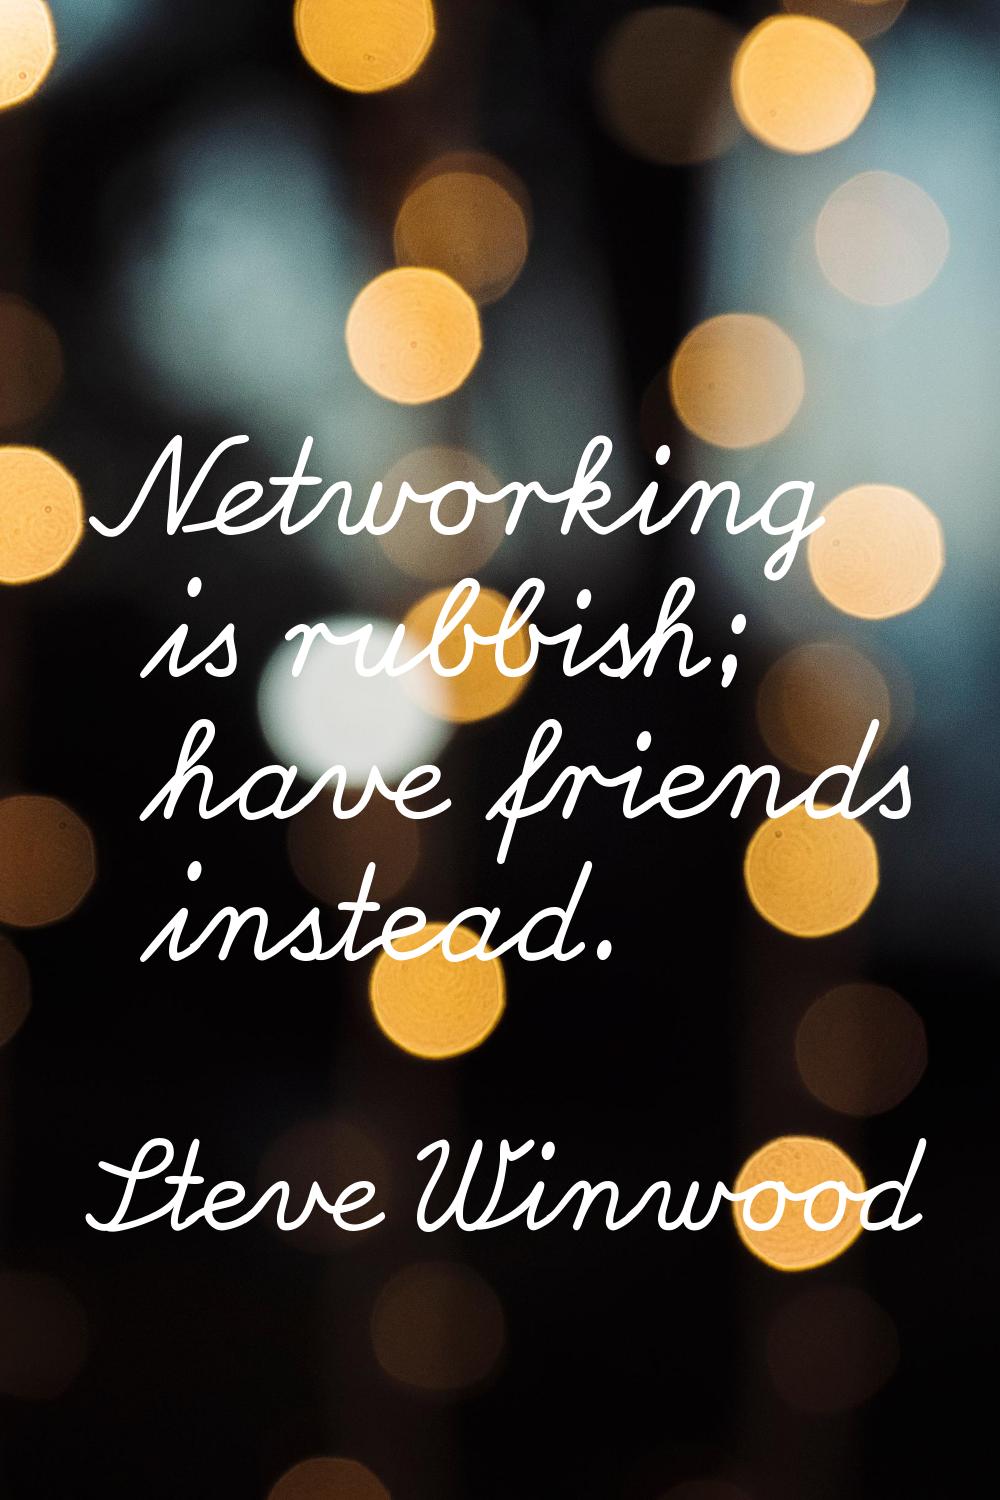 Networking is rubbish; have friends instead.